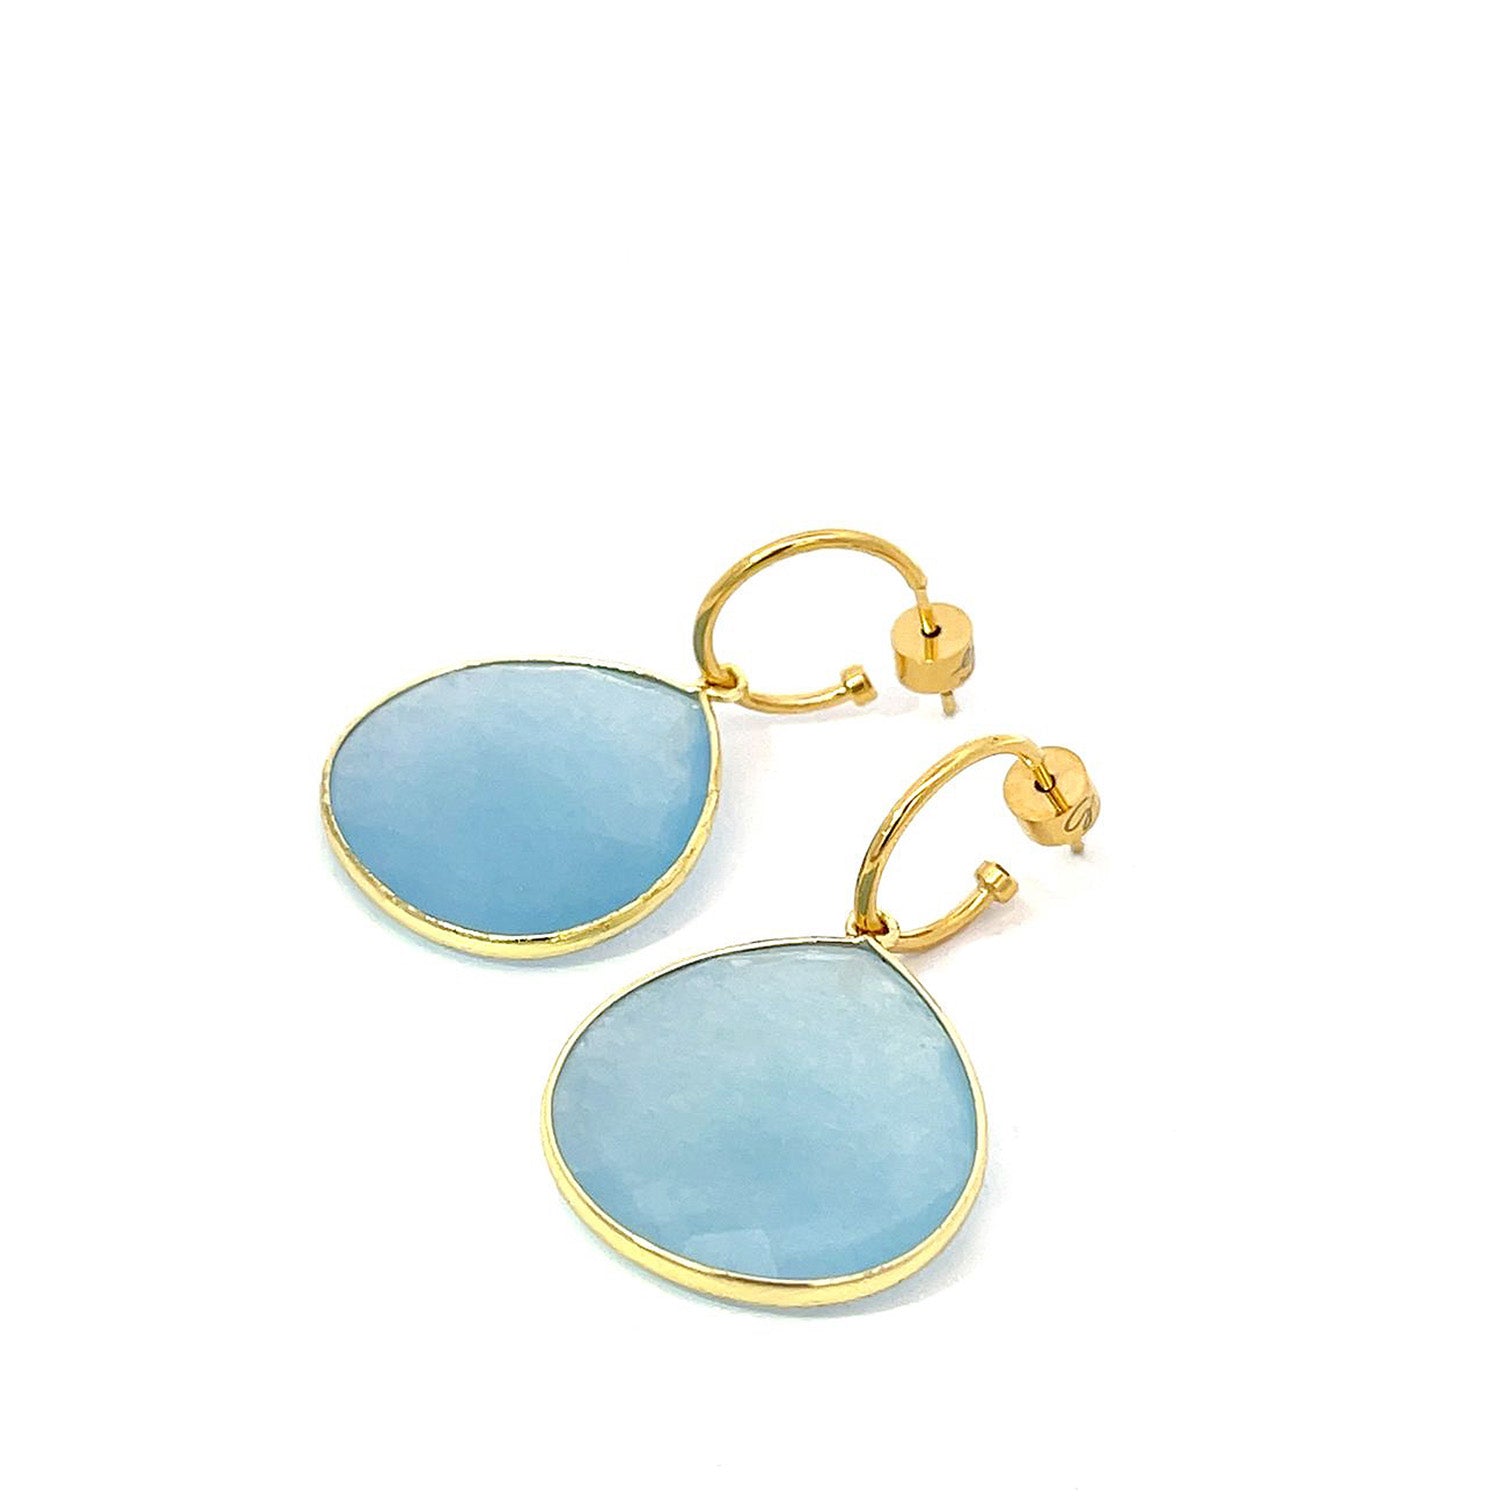 Luxe Marina Aquamarine Earrings for Every Occasion